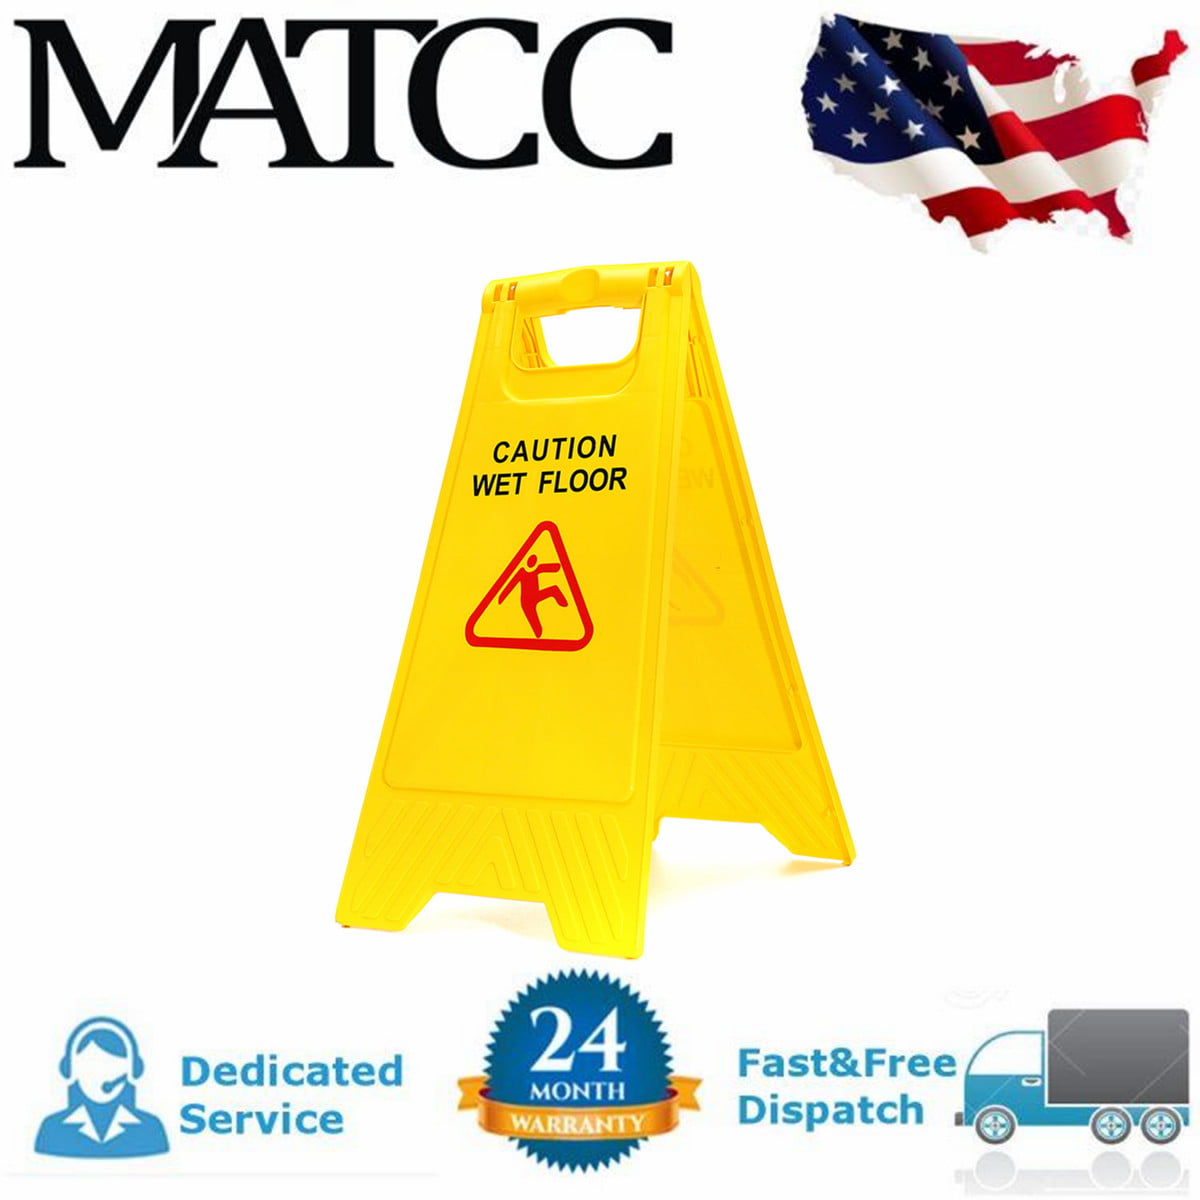 Caution Wet Floor Yellow Safety Sign Cleaning Slippery Warning Bright 2 Sided